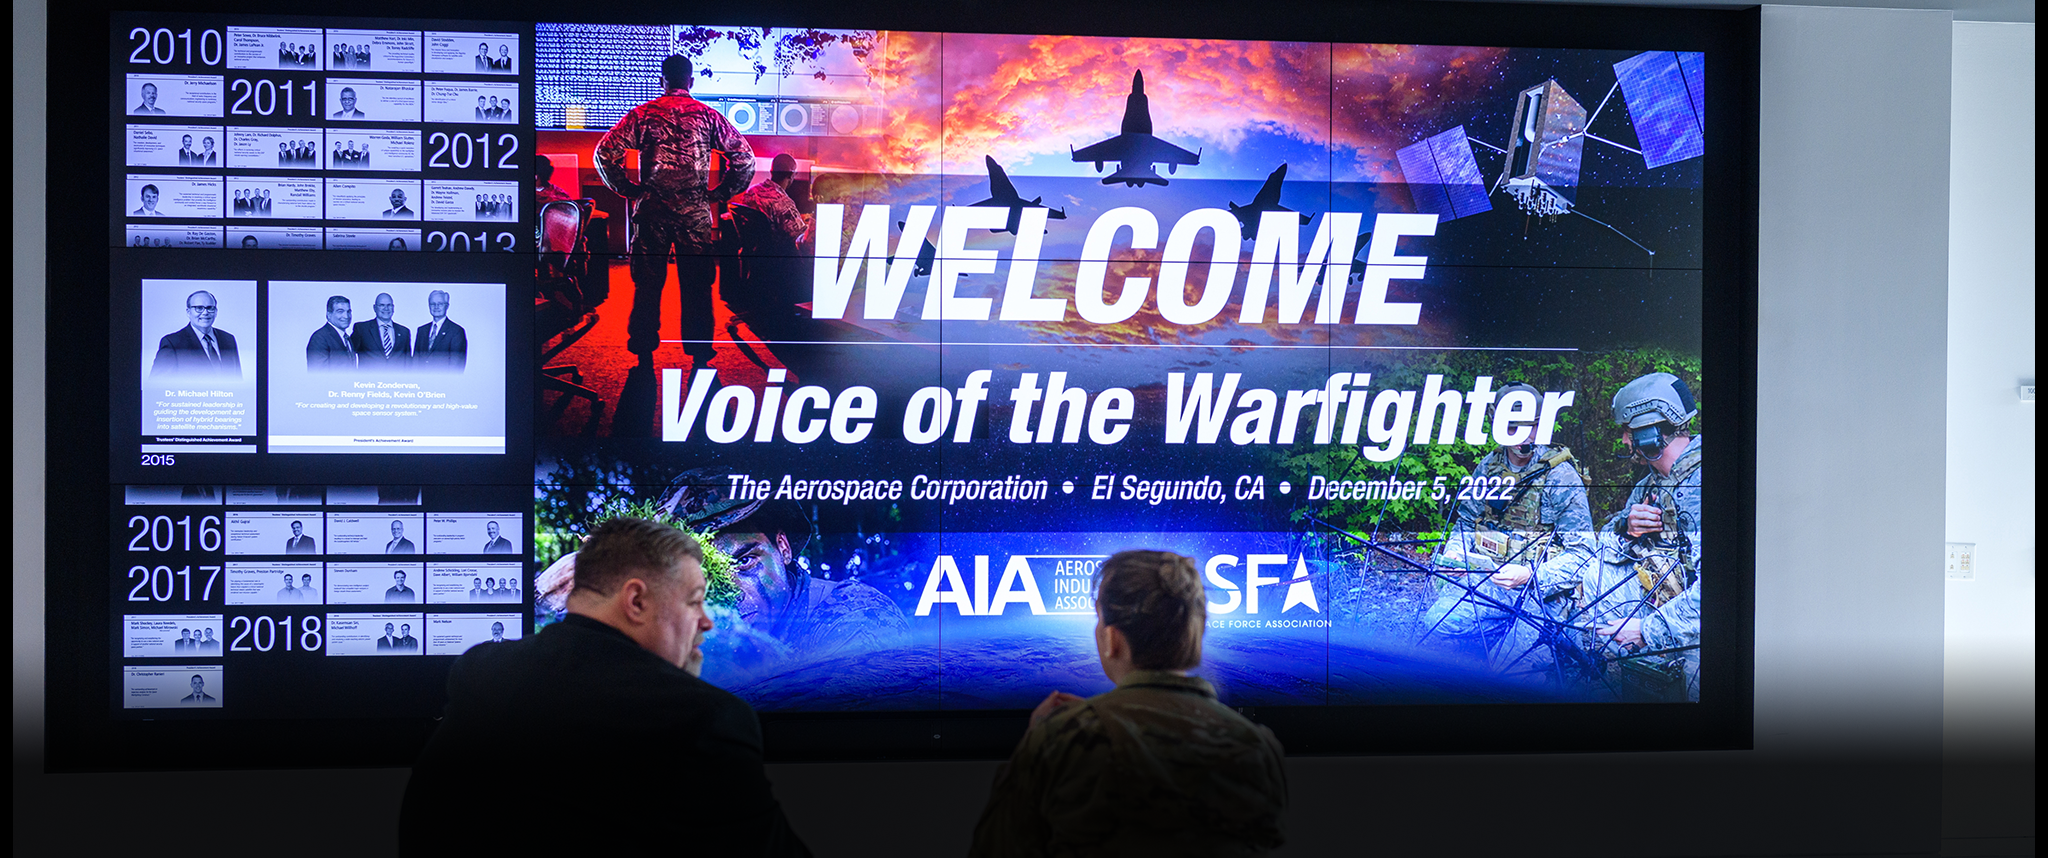 The Voice of the Warfighter event, hosted by Aerospace's Commercial Space Futures, brought together key stakeholders to explore advancing the ability to outpace the threat through purpose-built hybrid commercial and government architectures.